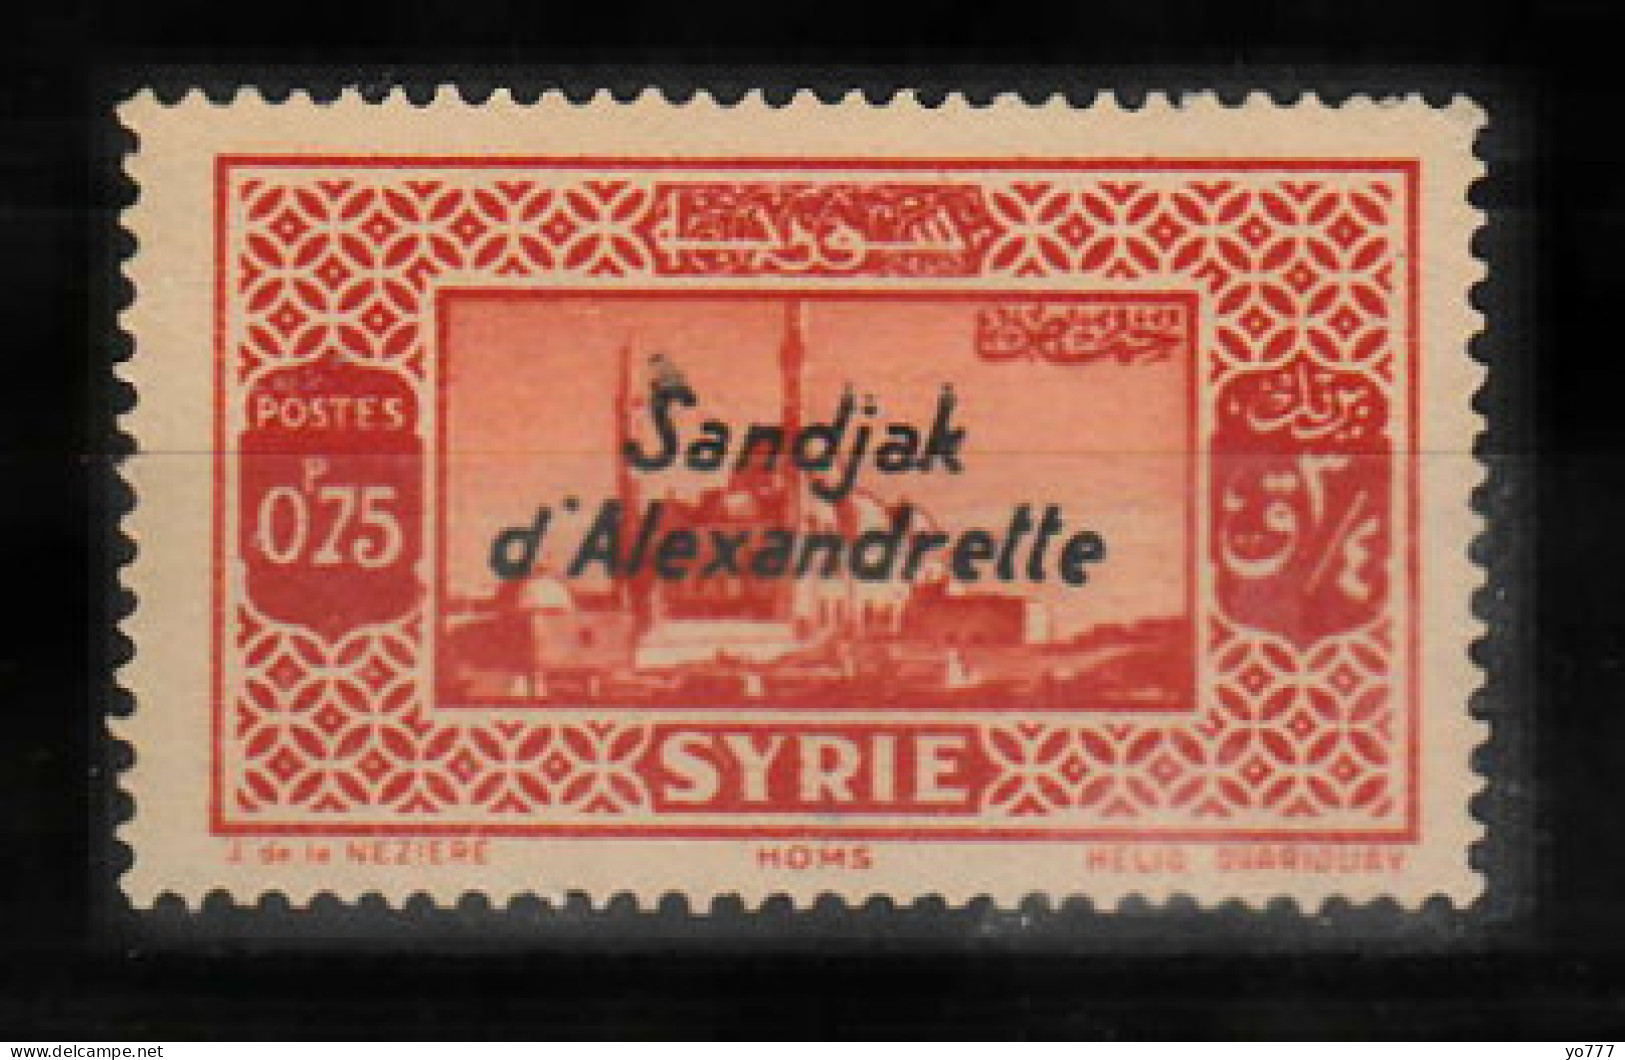 (H-04) 1938 HATAY STAMPS WITH RED AND BLACK SANDJAK D'ALEXANDRETTE OVERPRINT ON SYRIA POSTAGE STAMPS MH* NO GUM - 1934-39 Sandjak D'Alexandrette & Hatay